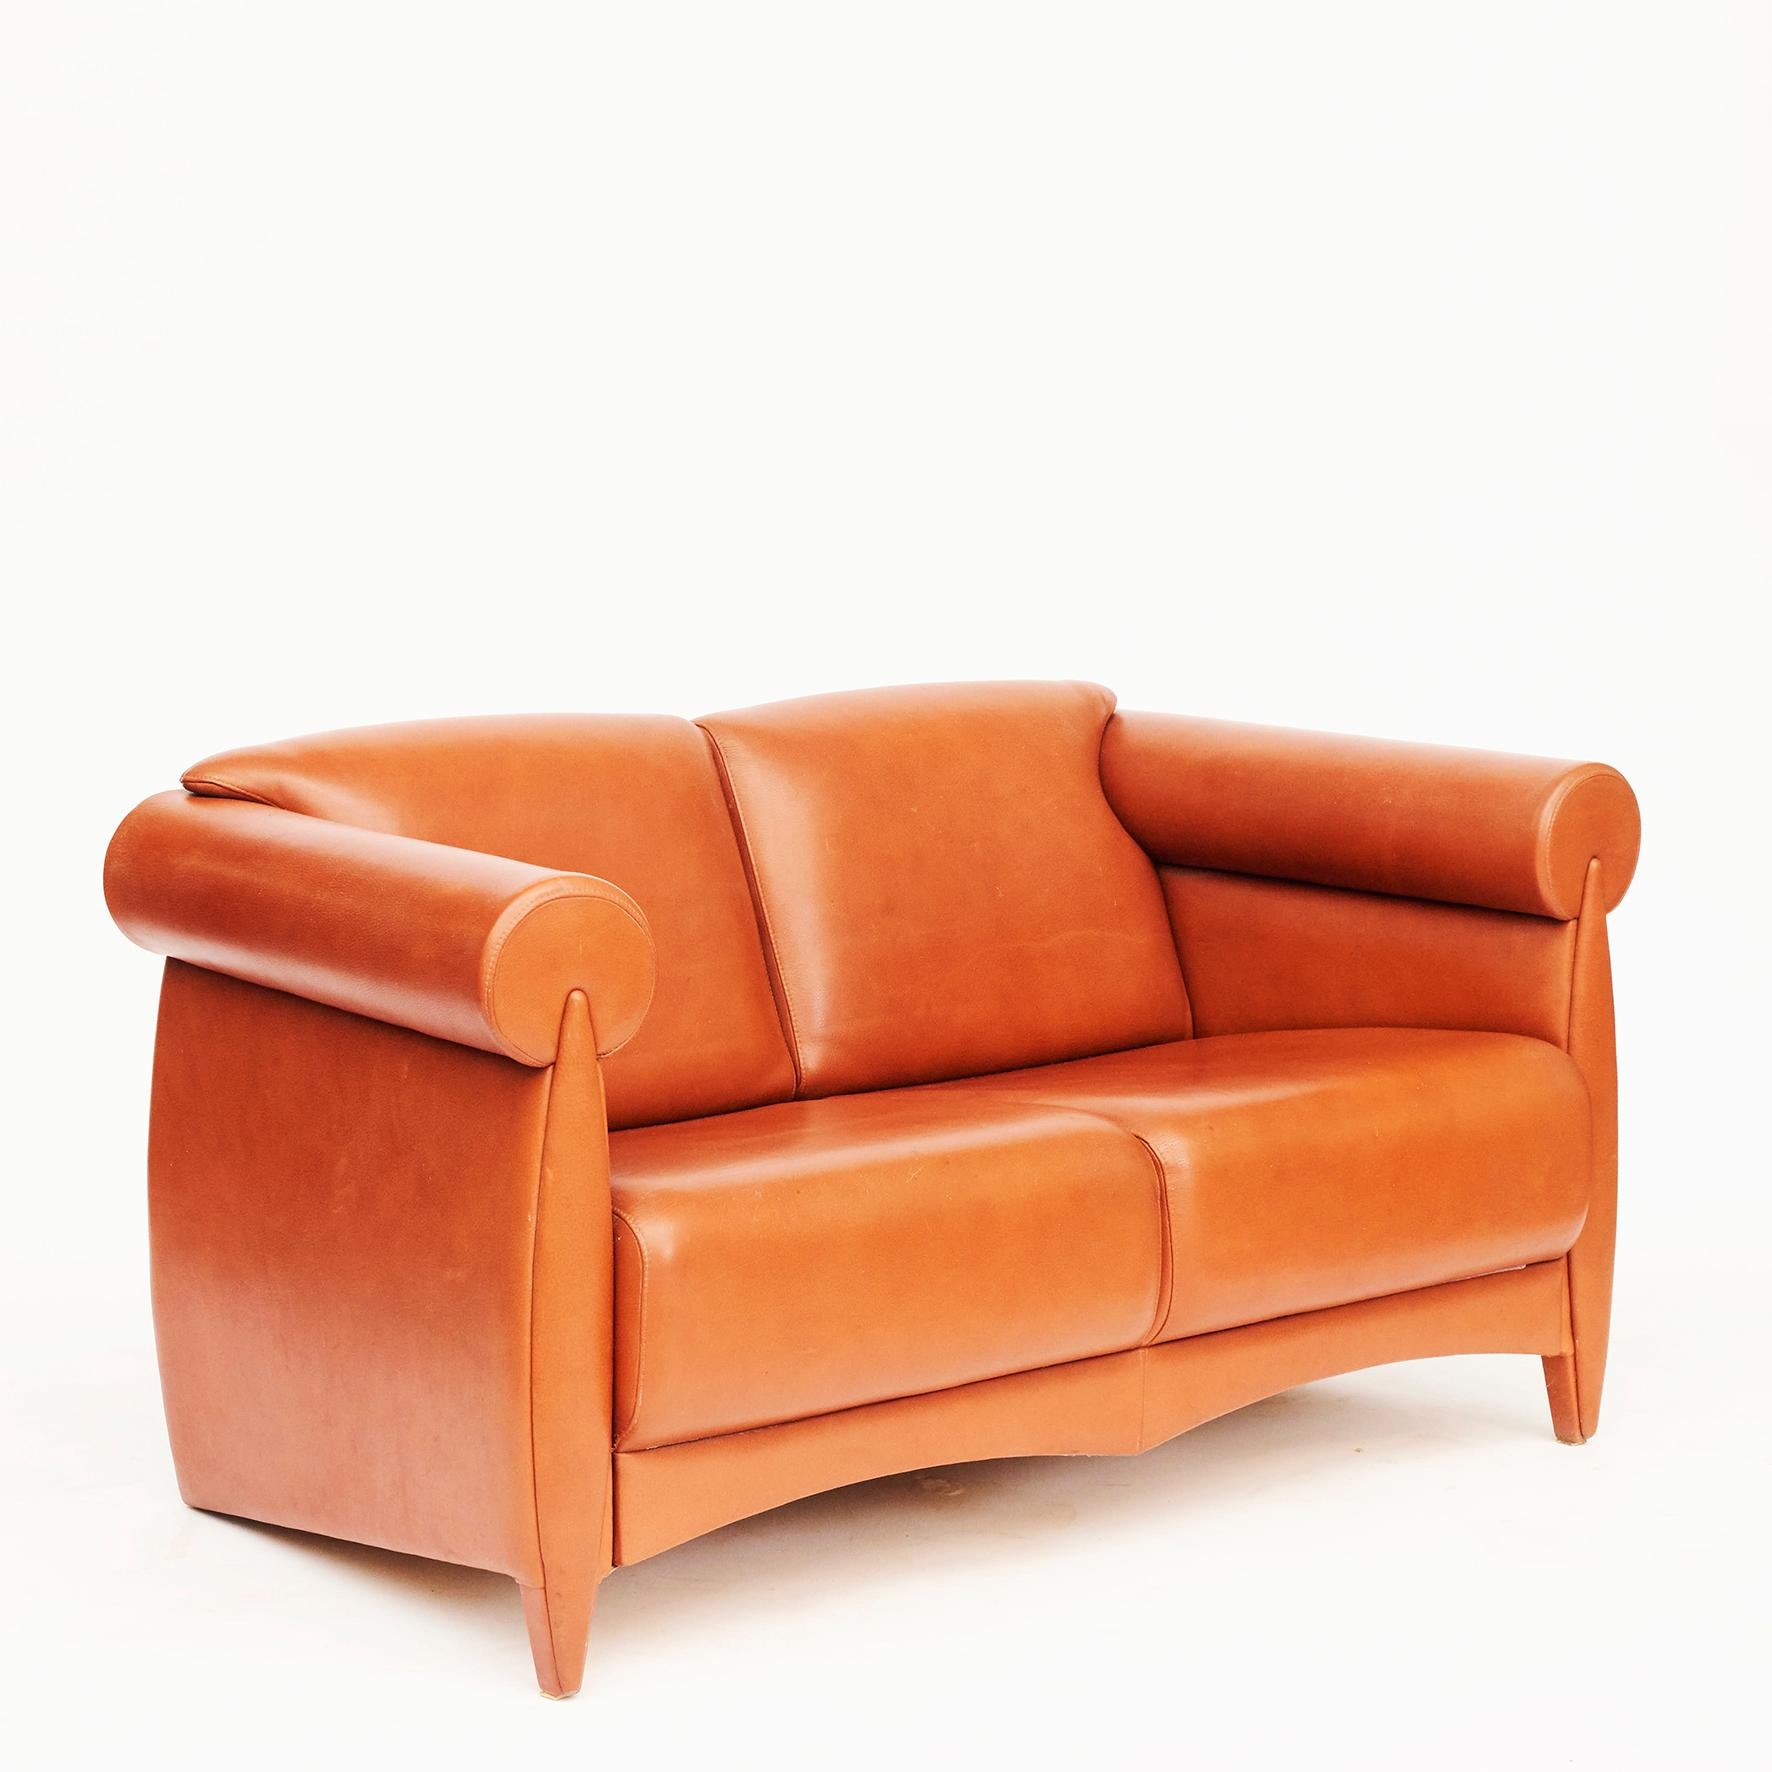 This rare prototype sofa by Klaus Wettergren is upholstered with a cognac colored leather. A rare sofa as it was only made in limited quantity by orders.

Klaus Wettergren (born in 1943) is a Danish designer. His style is based on a fascination